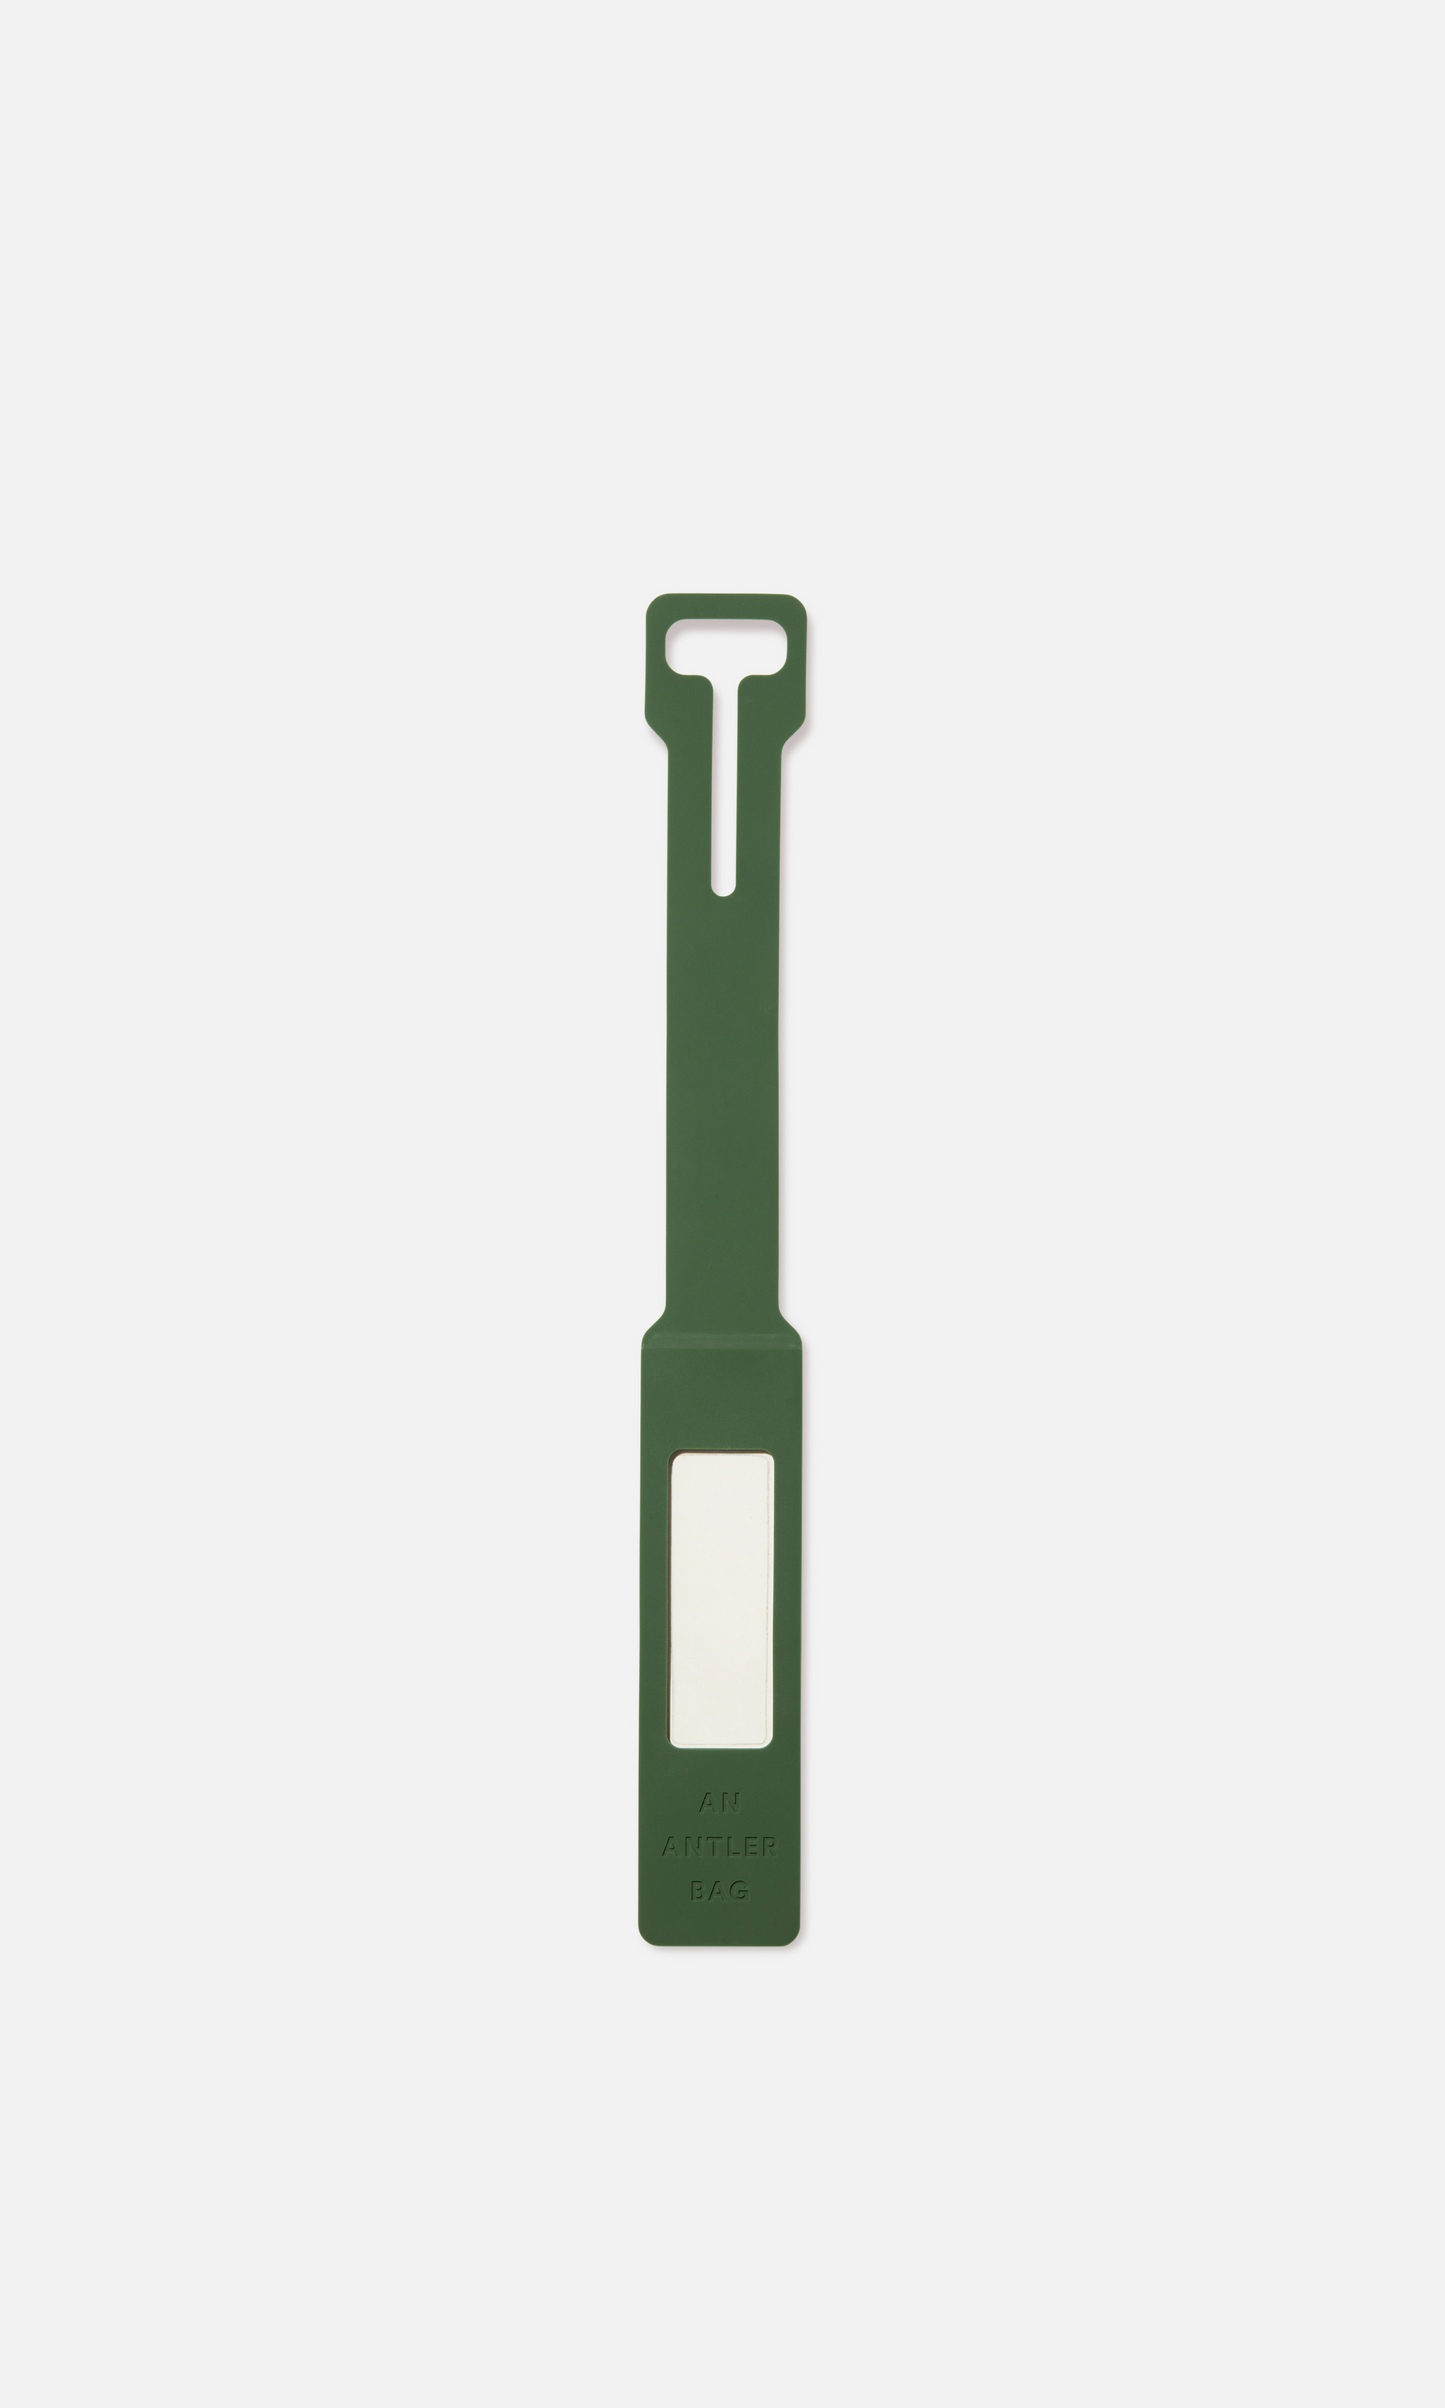 Antler luggage tag in green